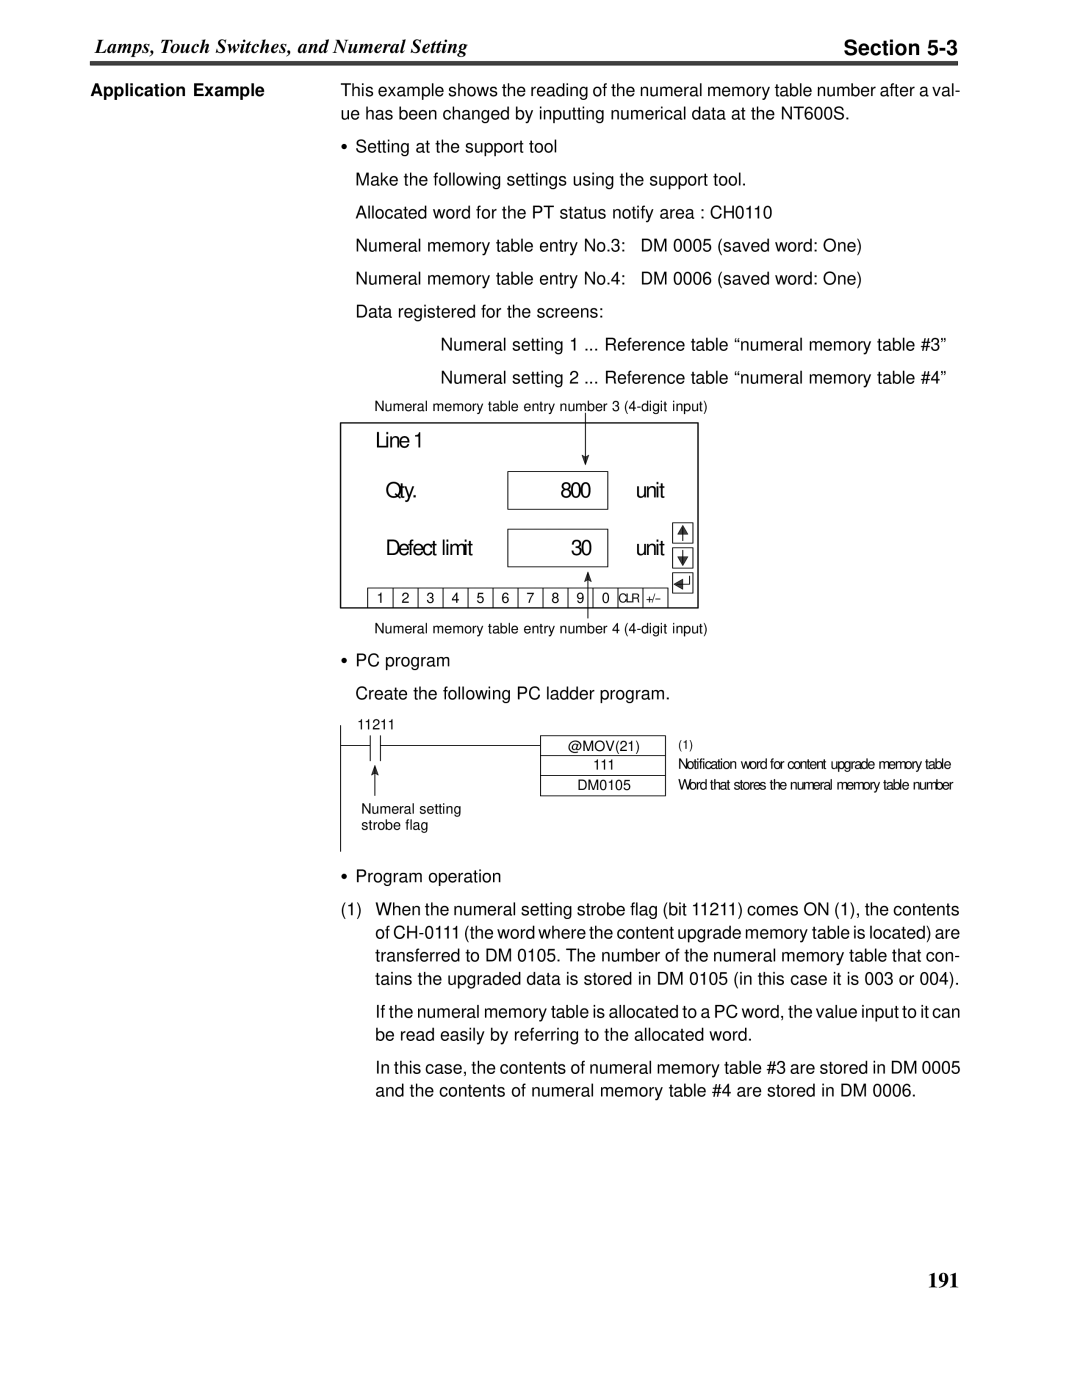 Omron V022-E3-1 operation manual Section, Line, unit, Defect limit, Application Example 